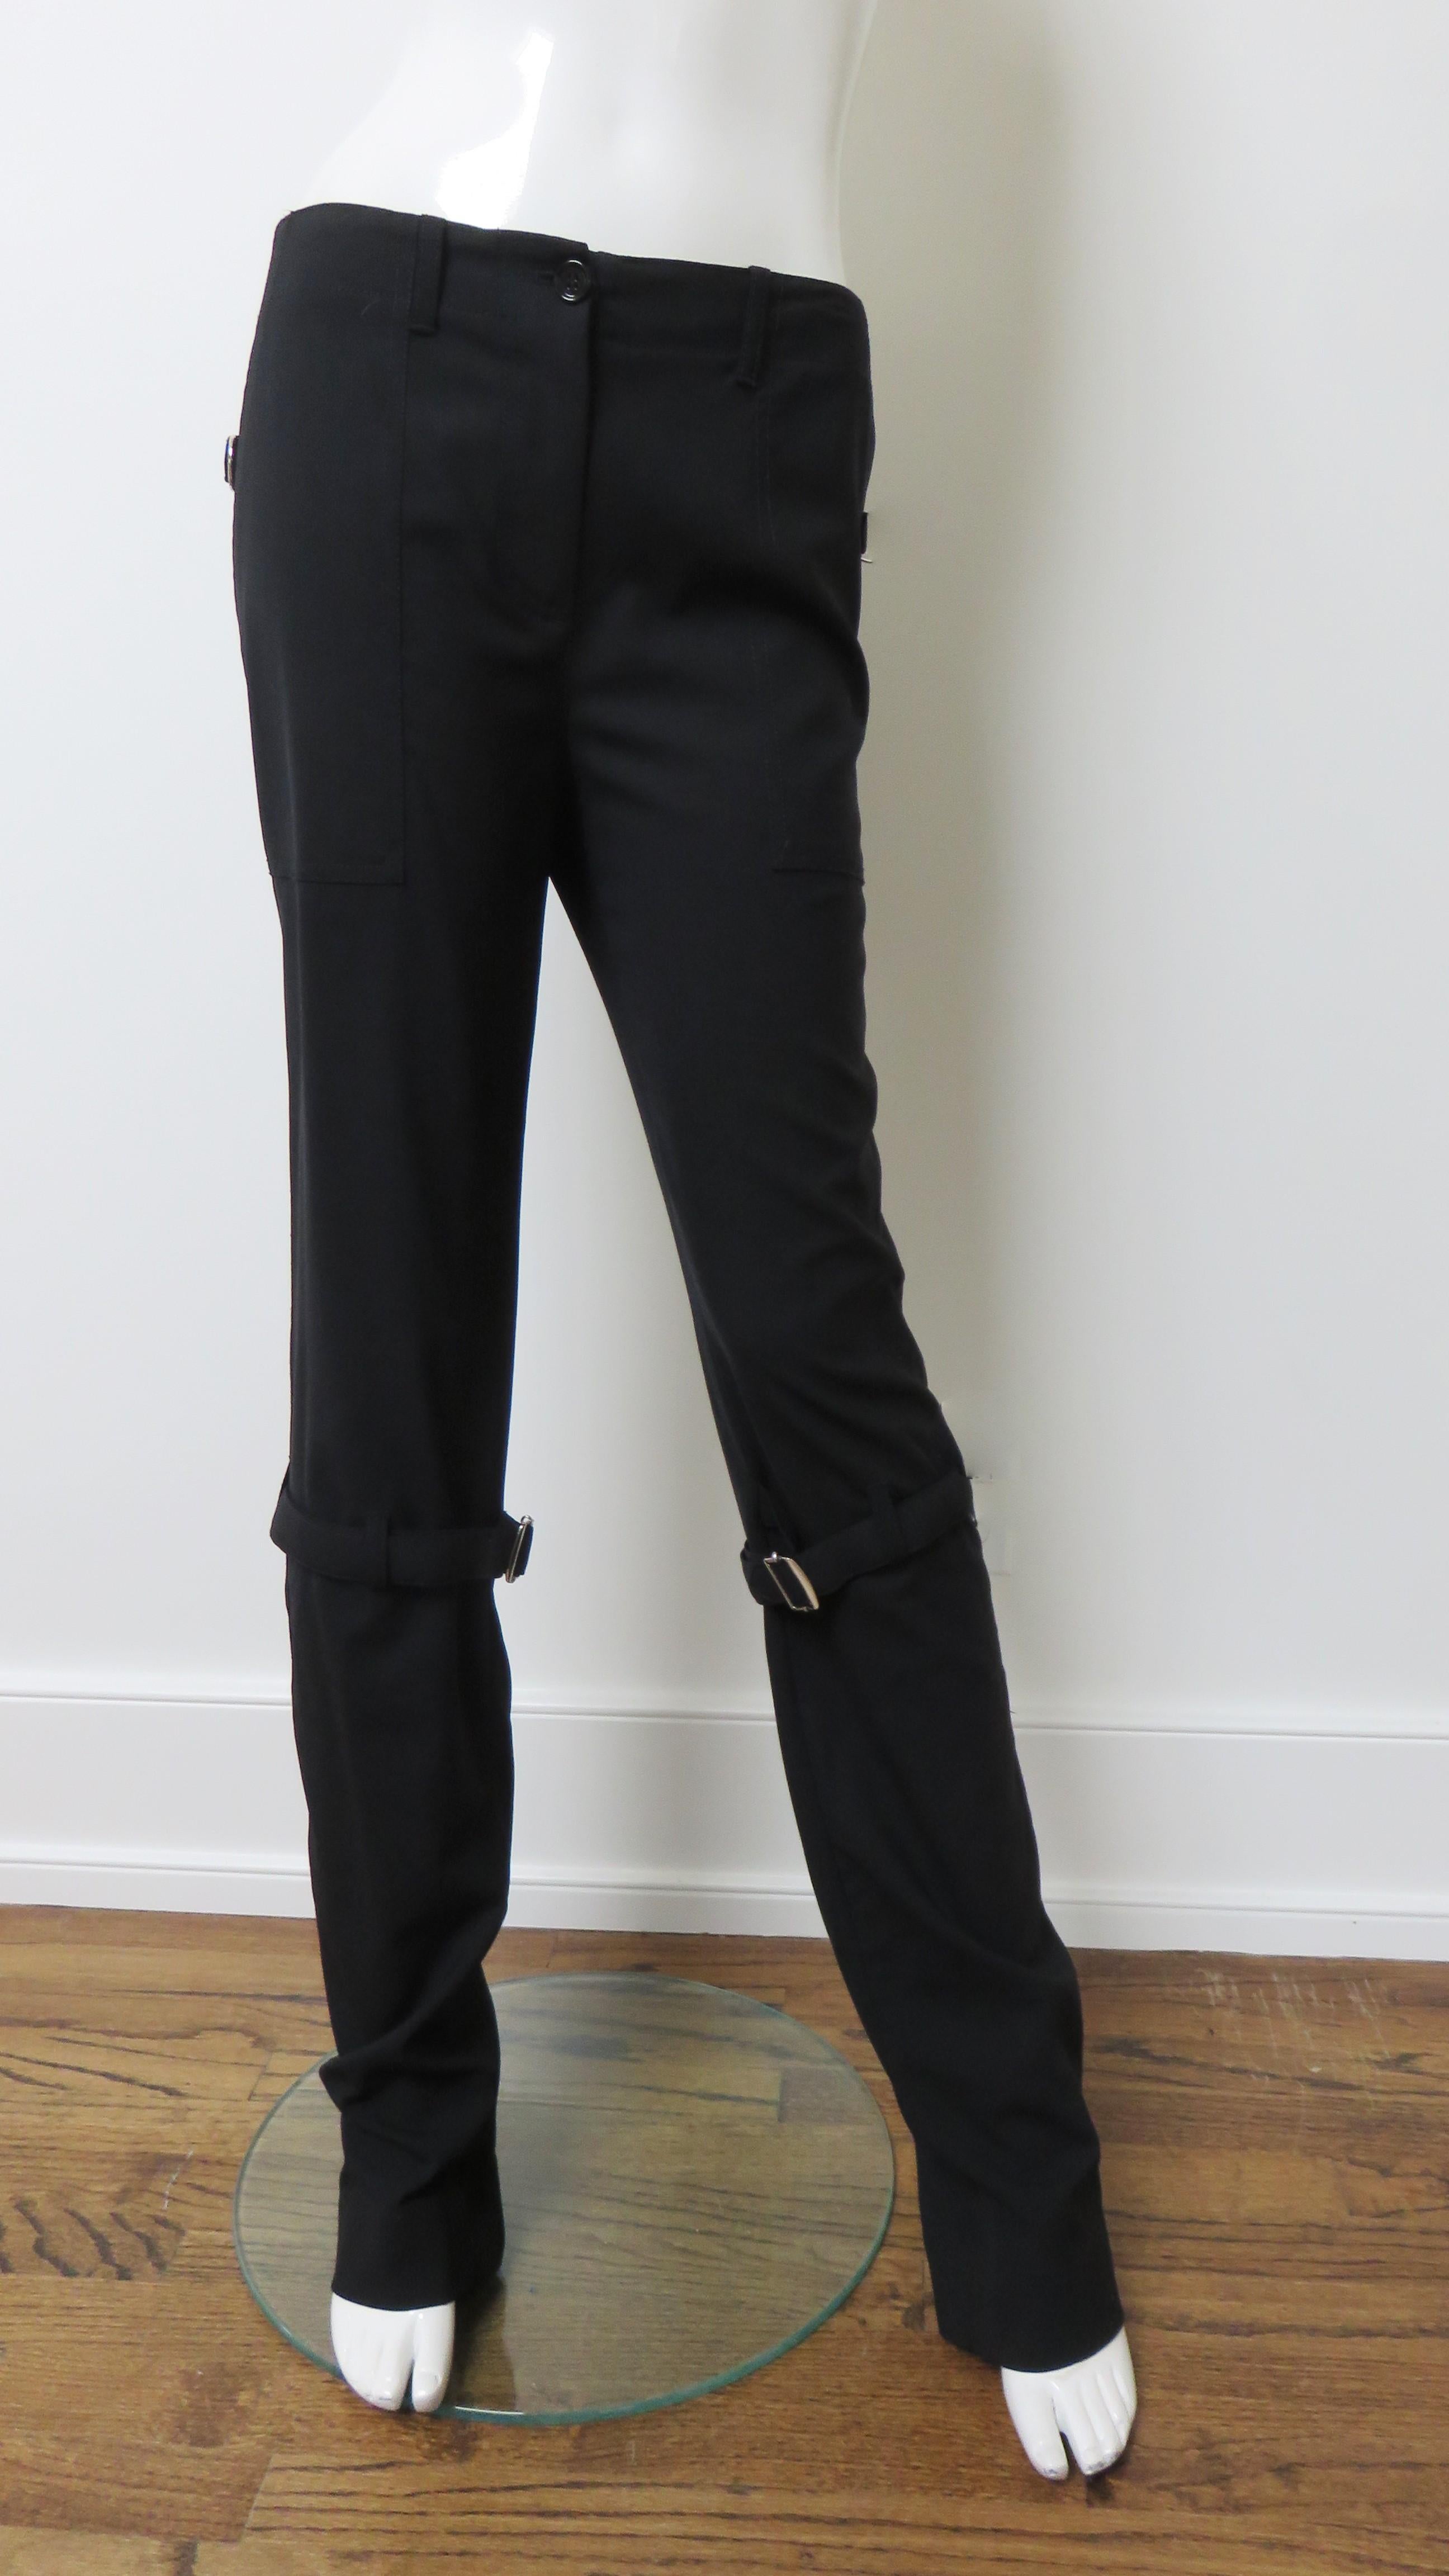 Fabulous black light weight wool pants with a bit of stretch by Dolce & Gabbana. They are mid rise with hip pockets and straight legs with an adjustable buckle strap around each at knee level and 2 vertical functional back separating zippers along